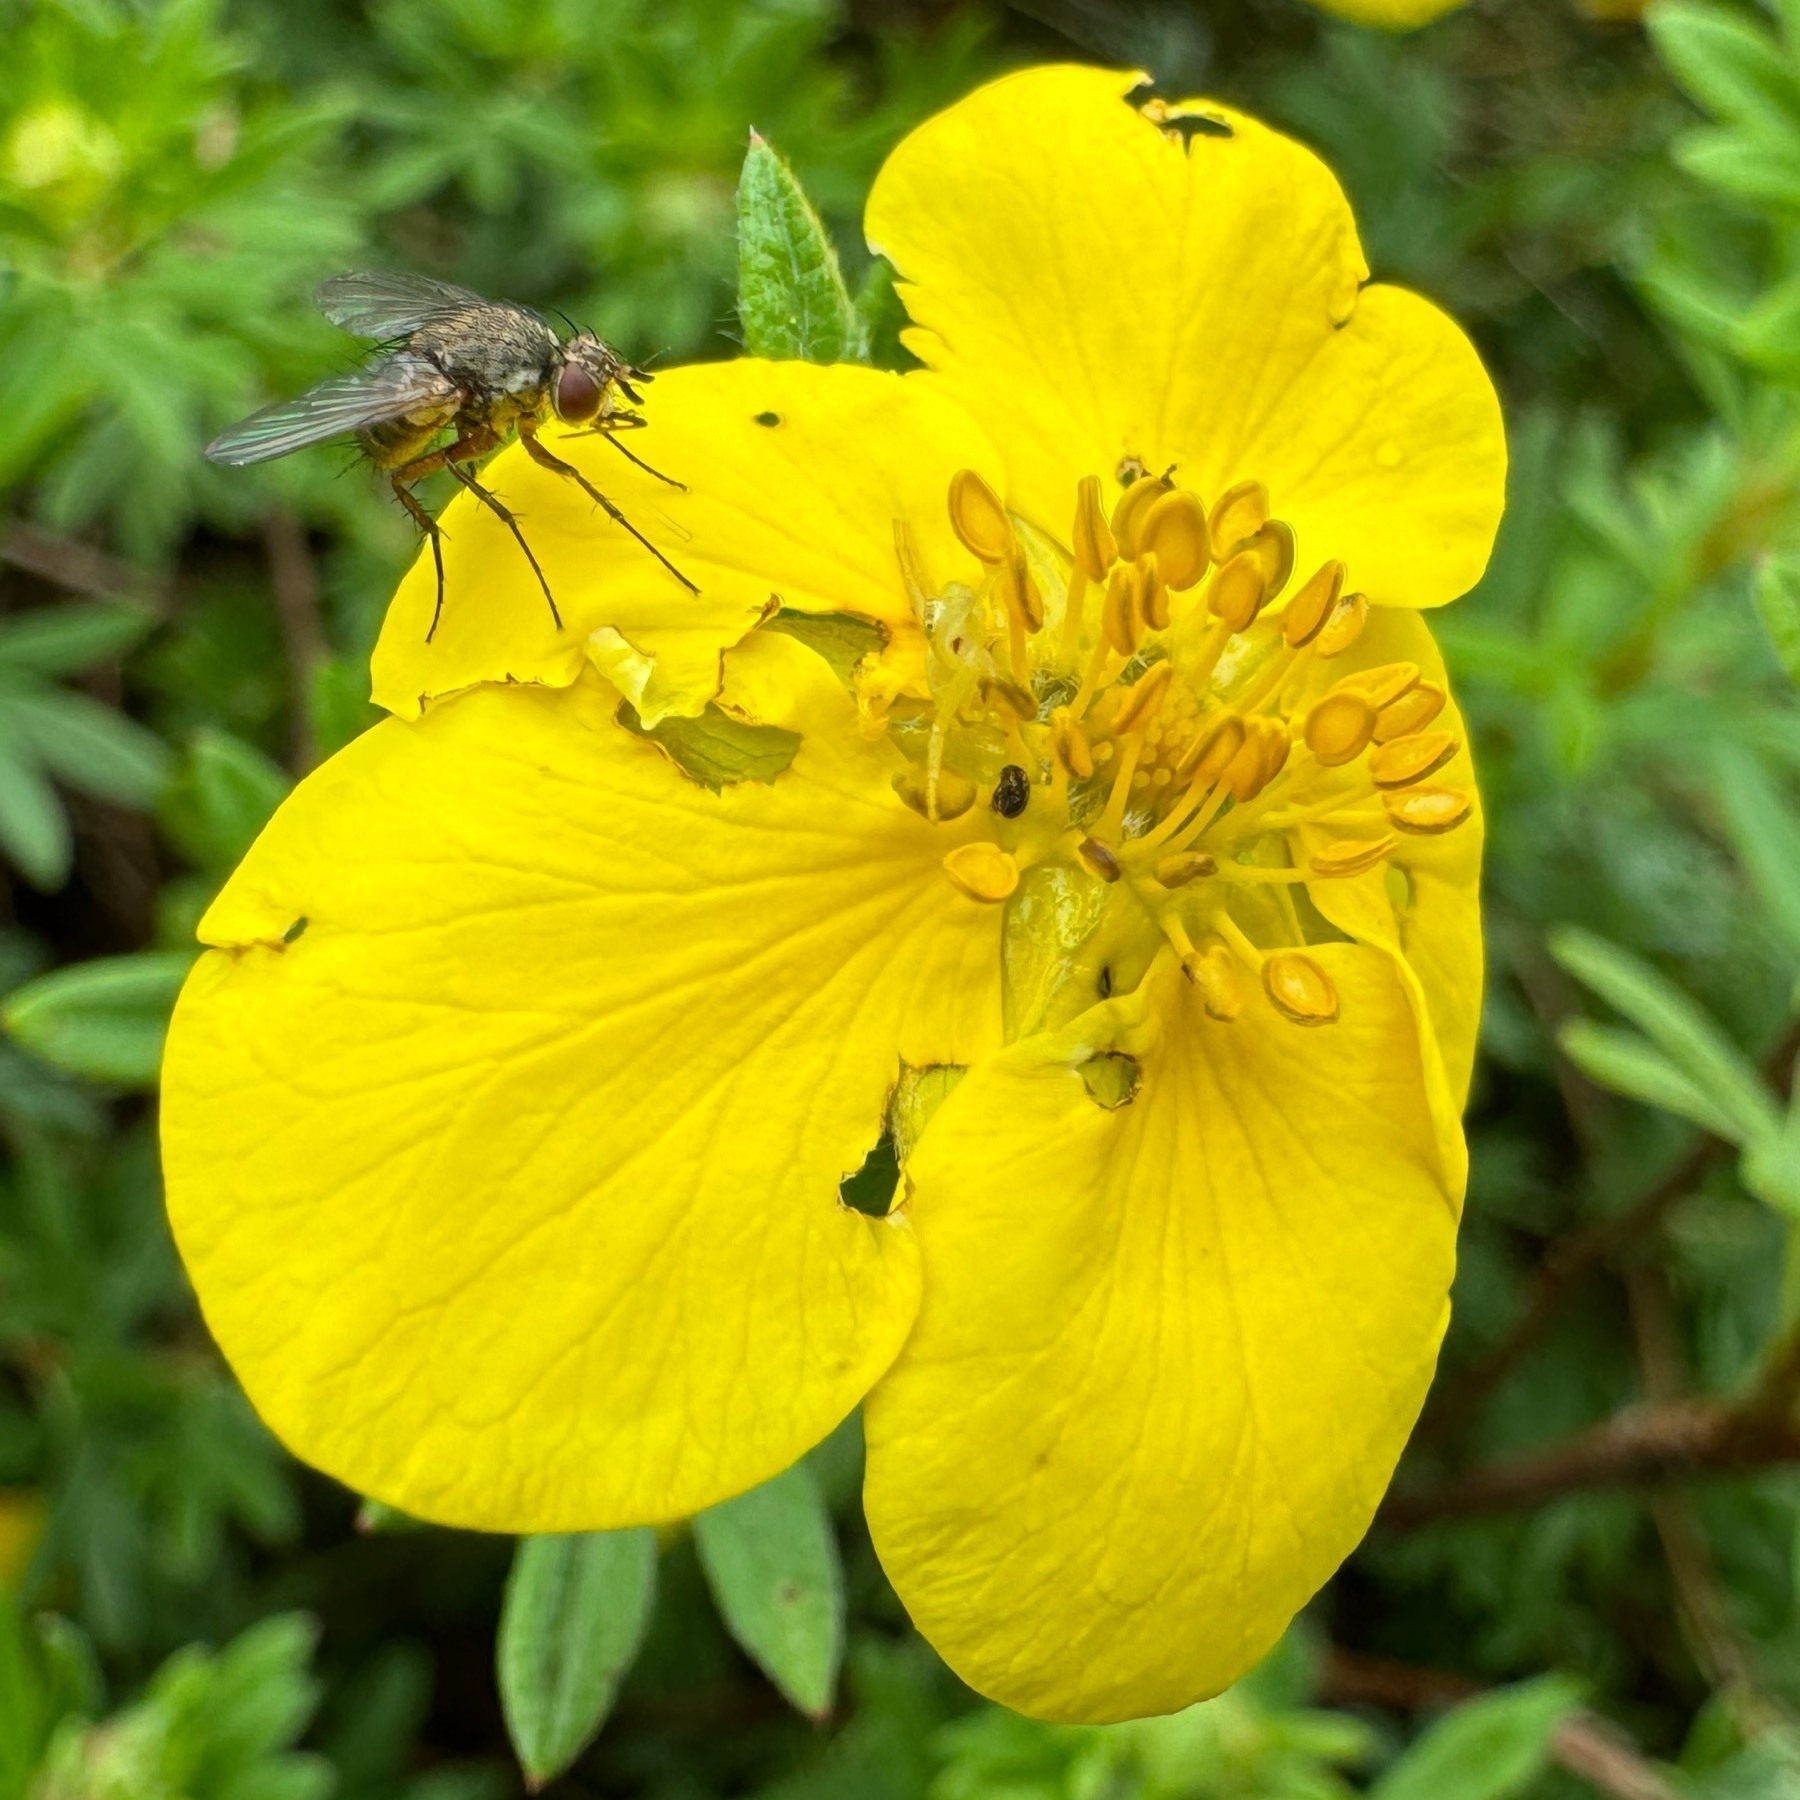 A fly perched on the side of a bright yellow flower with green foliage in the background.